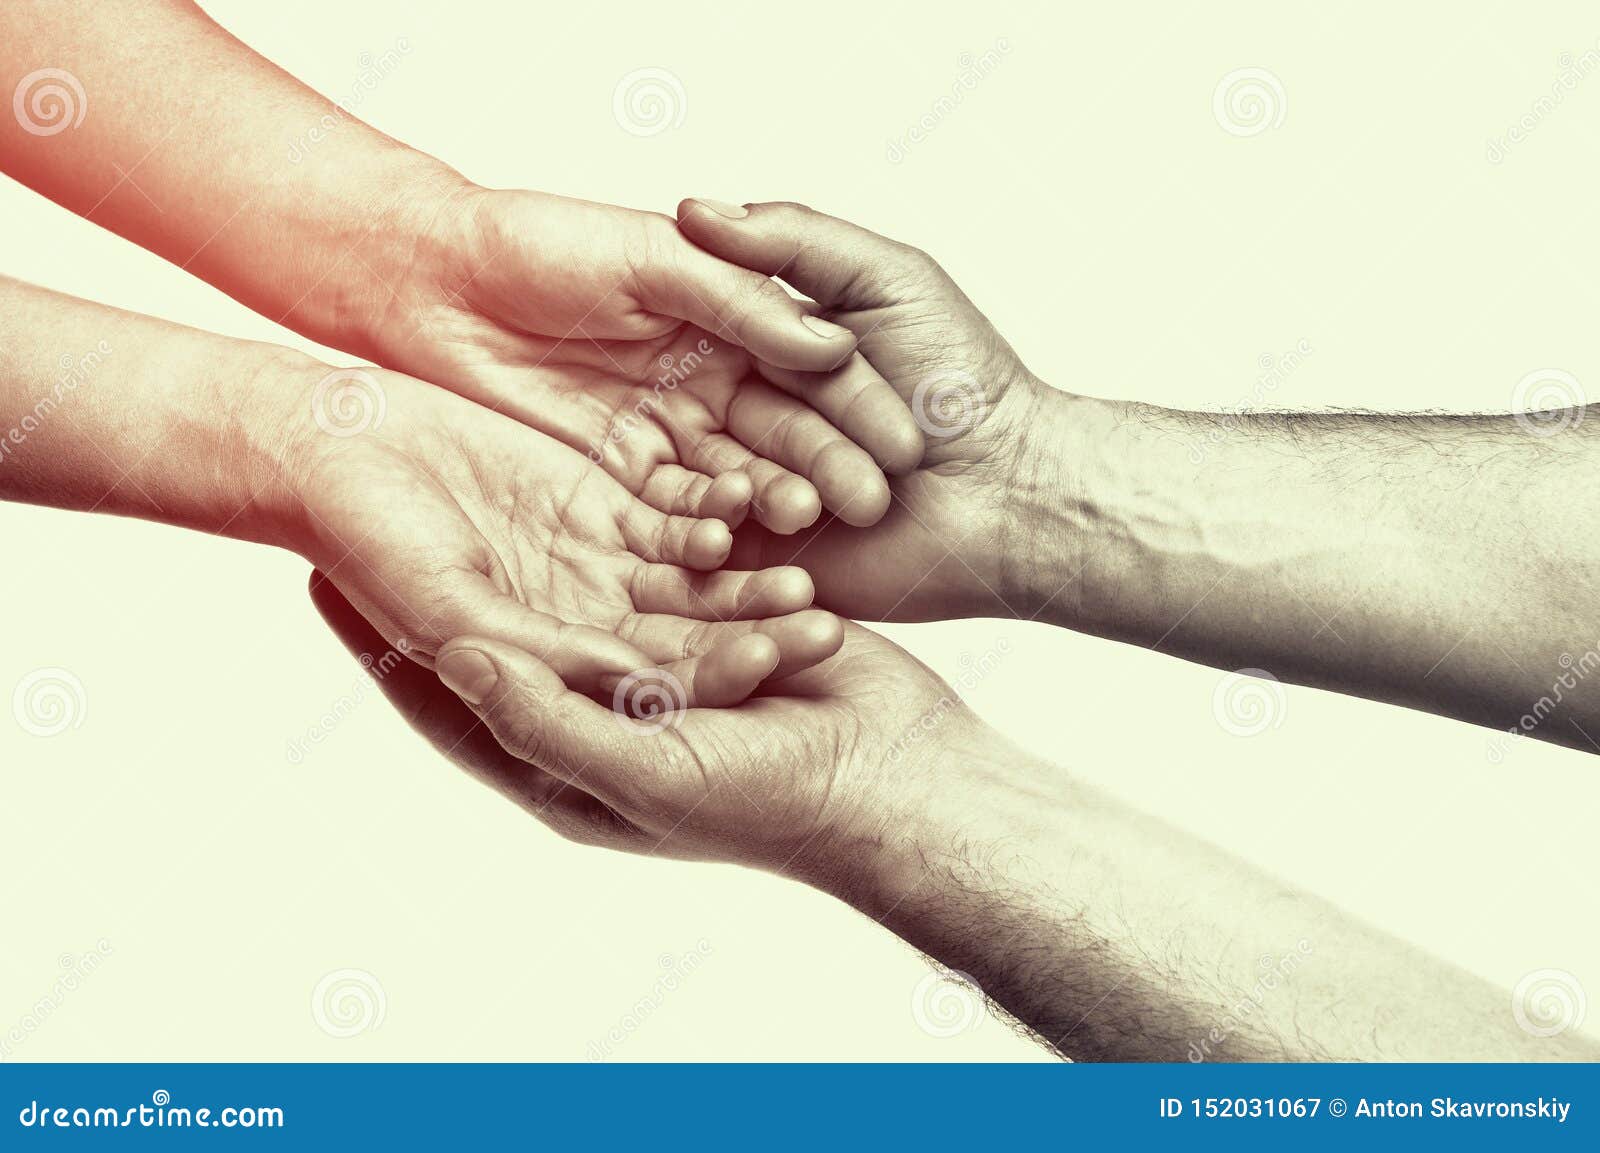 Concept Of Caring Tenderness Protection Stock Image Image Of 